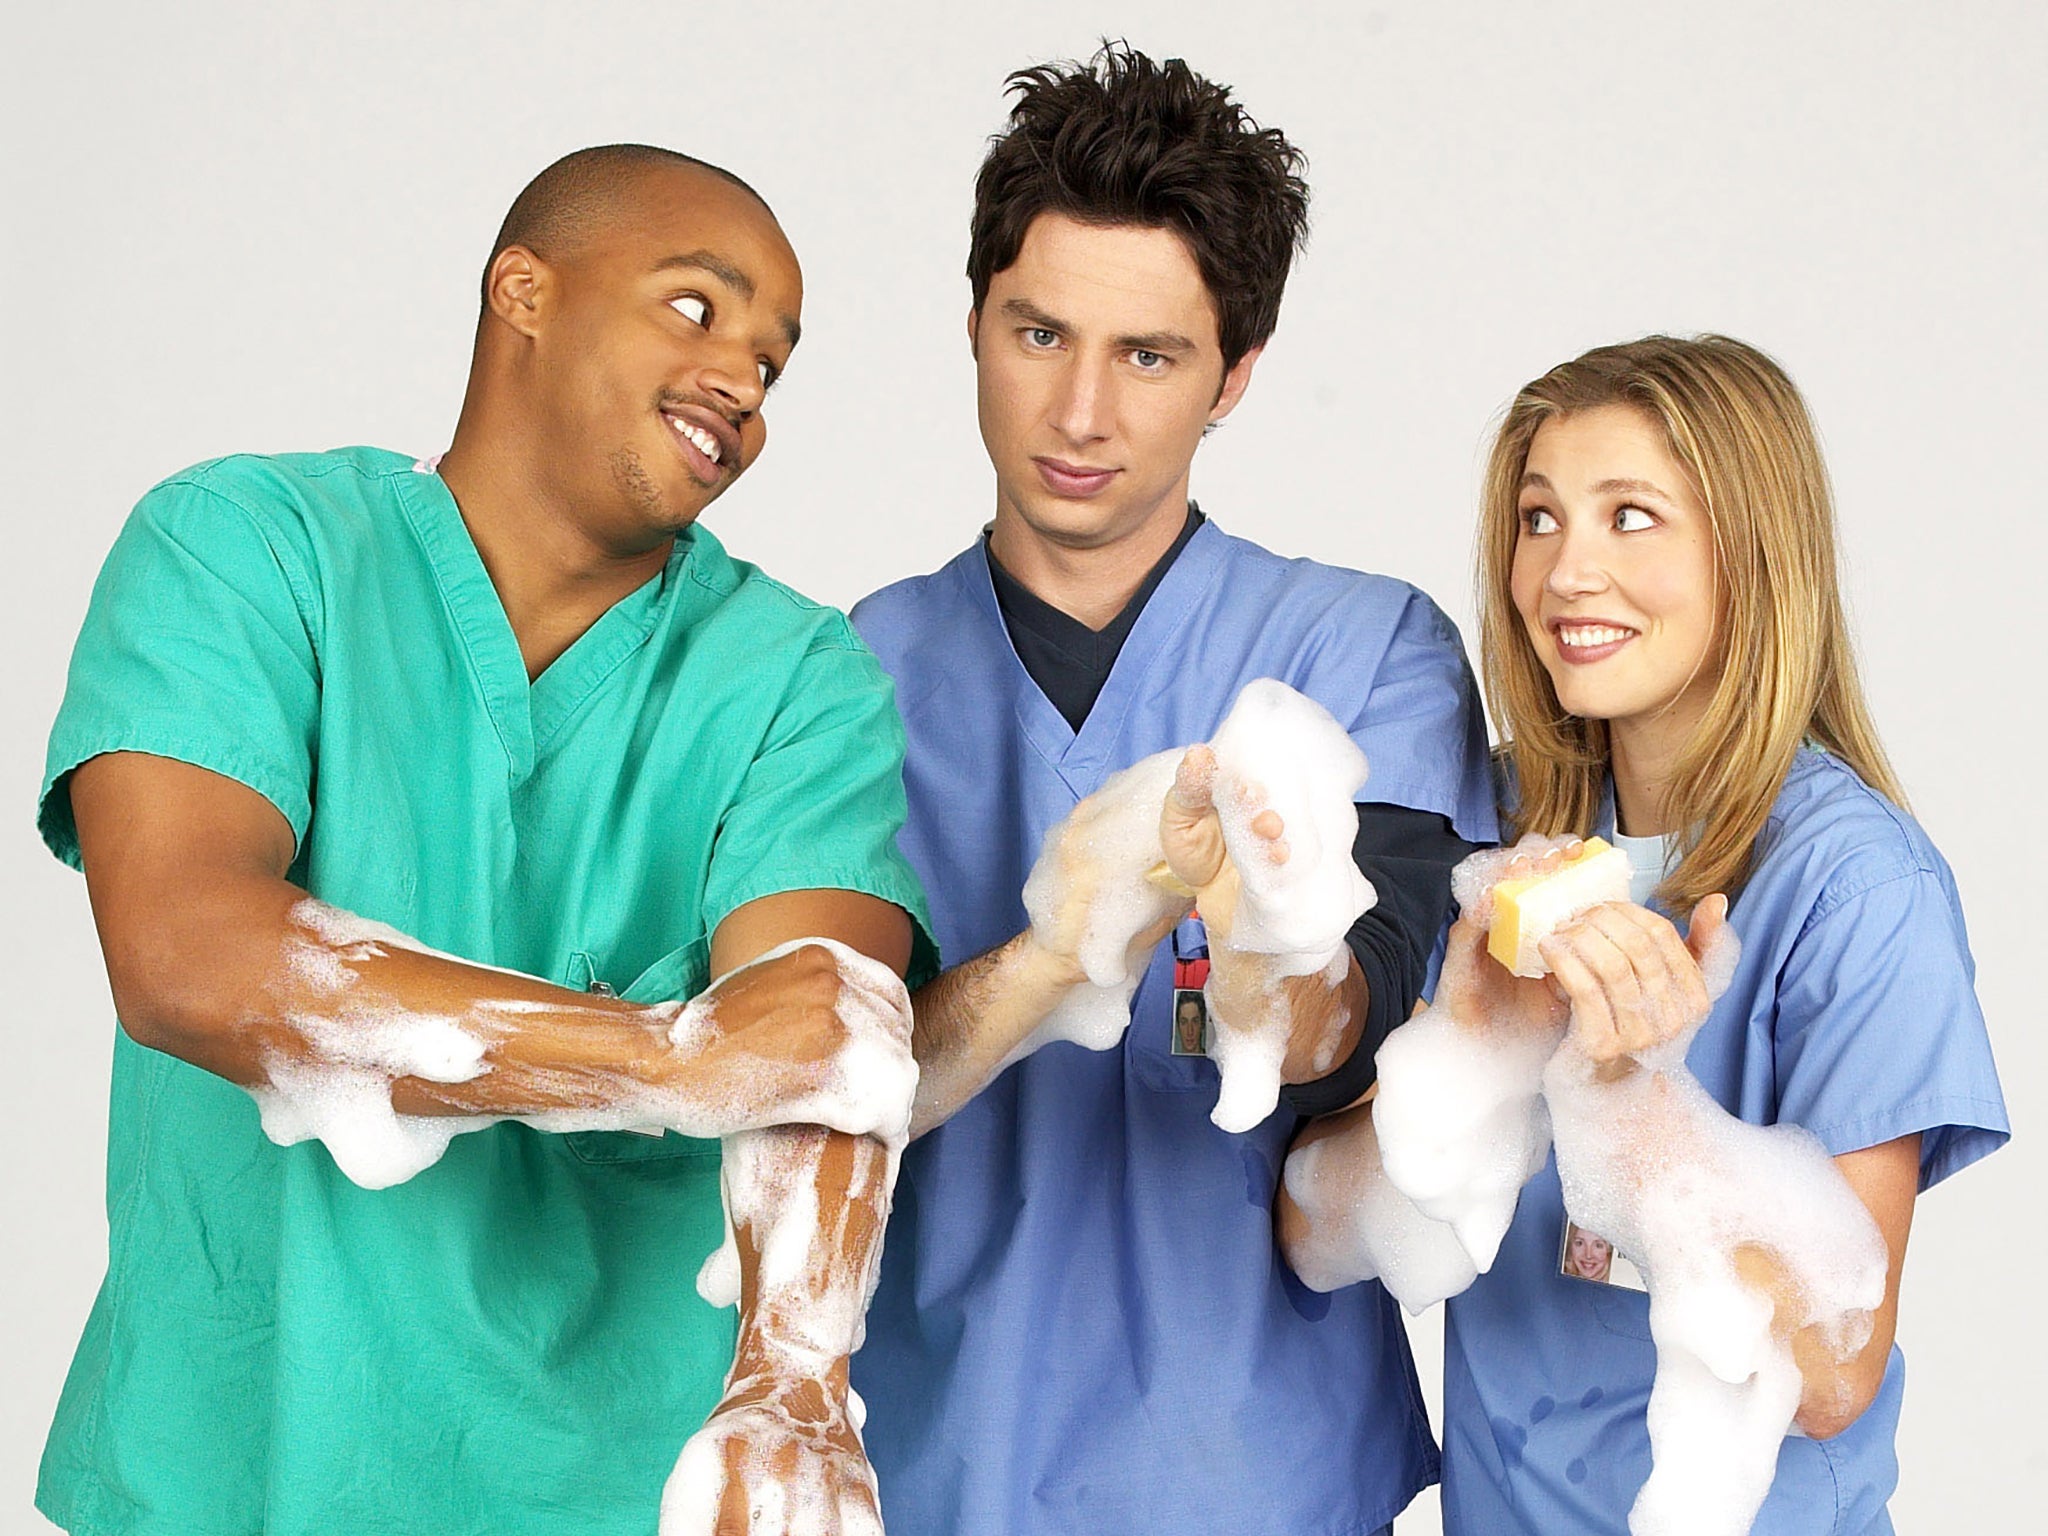 ‘I was doing some of the craziest s*** I’ve ever done in my career’: Donald Faison, Zach Braff and Sarah Chalke in ‘Scrubs’